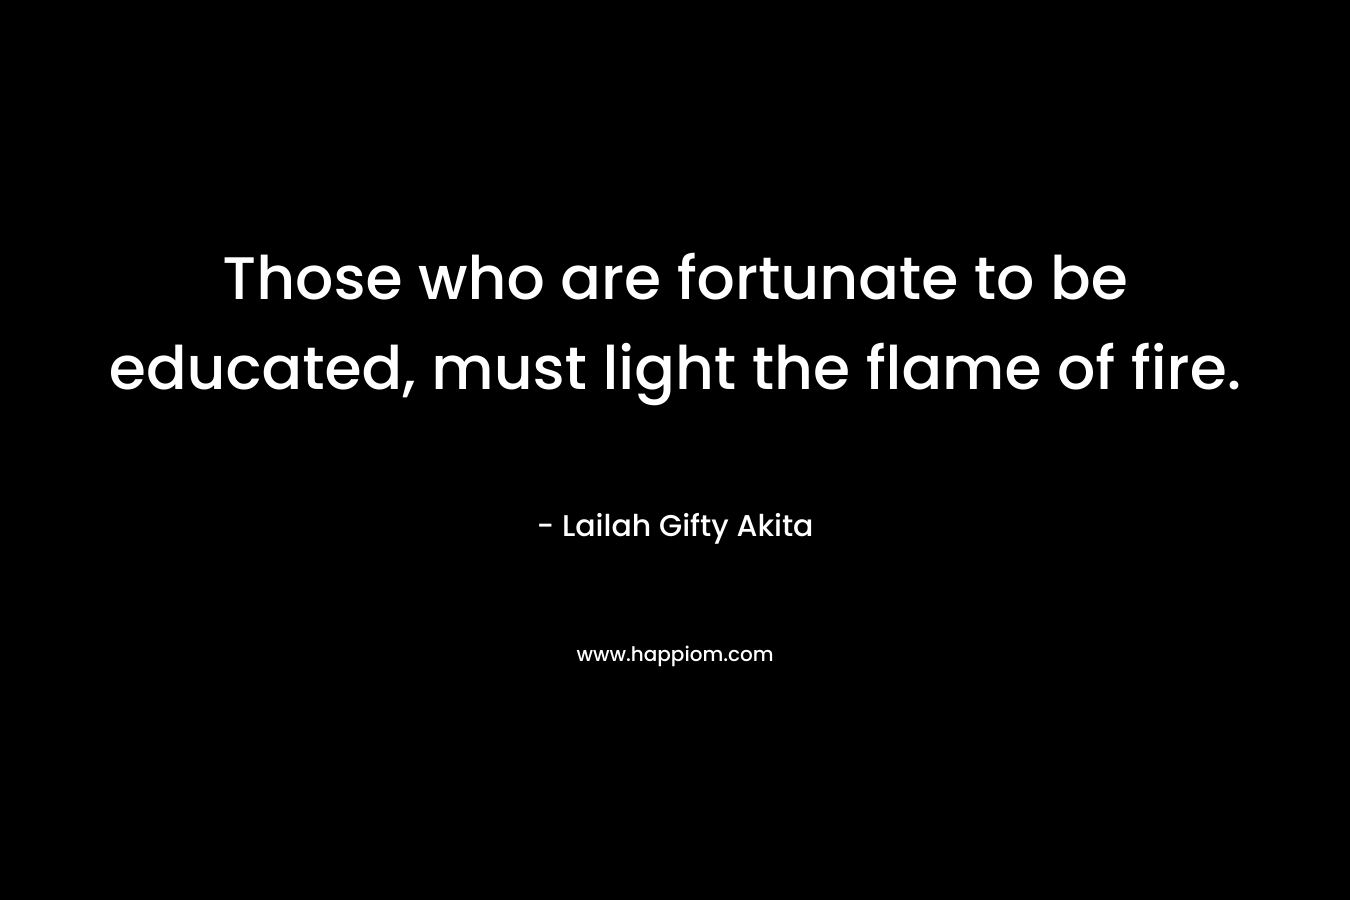 Those who are fortunate to be educated, must light the flame of fire. – Lailah Gifty Akita